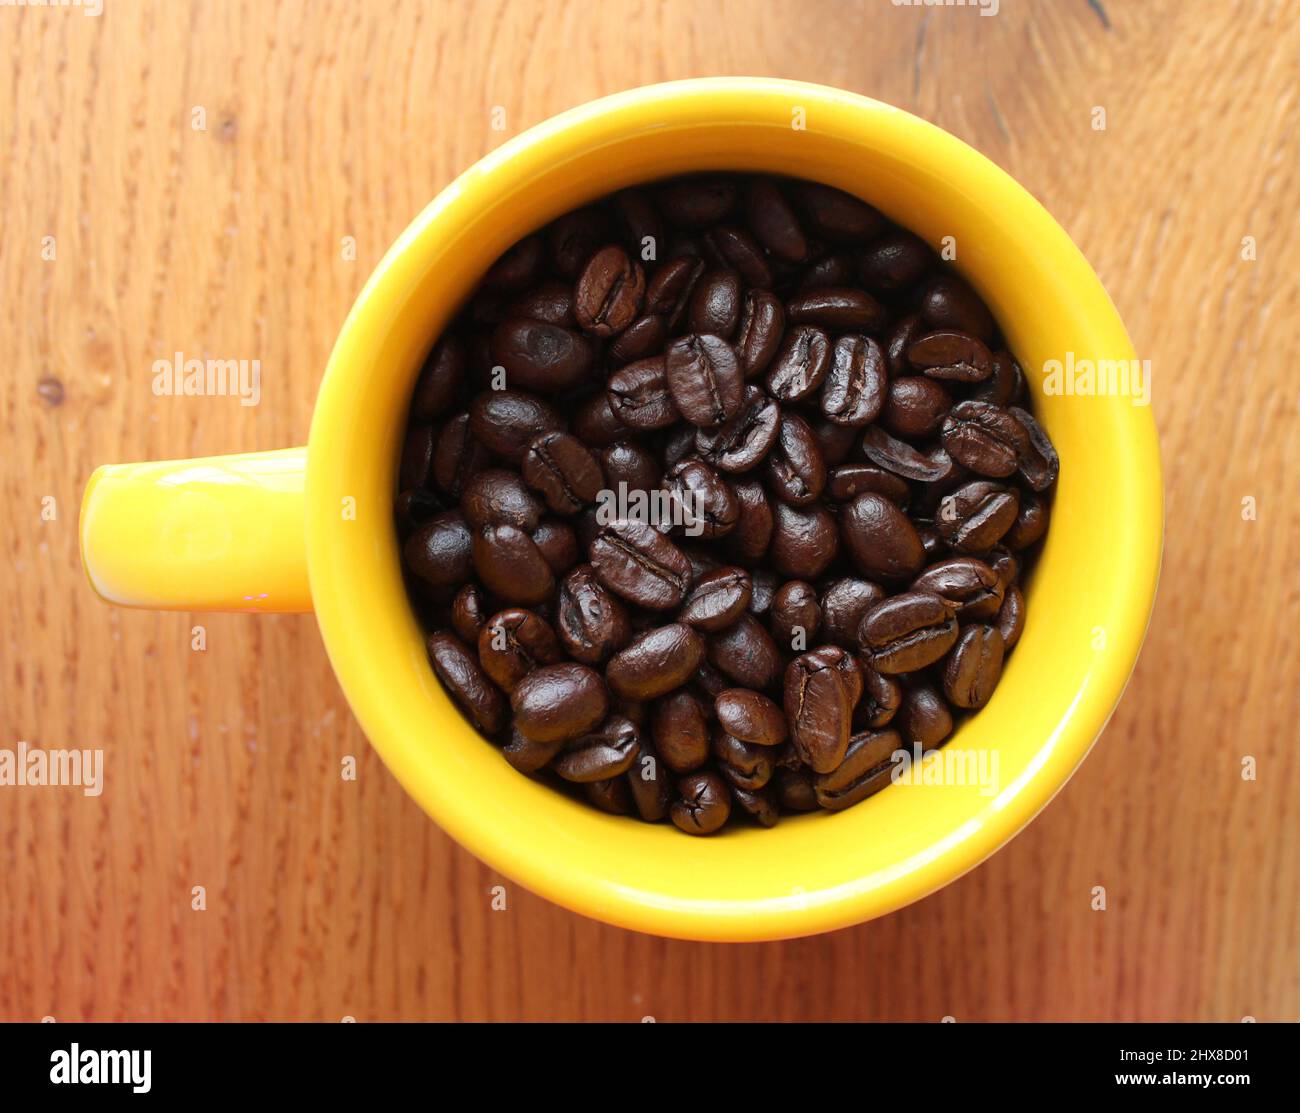 Roasted Whole Coffee Beans in a Bright Yellow Mug Stock Photo